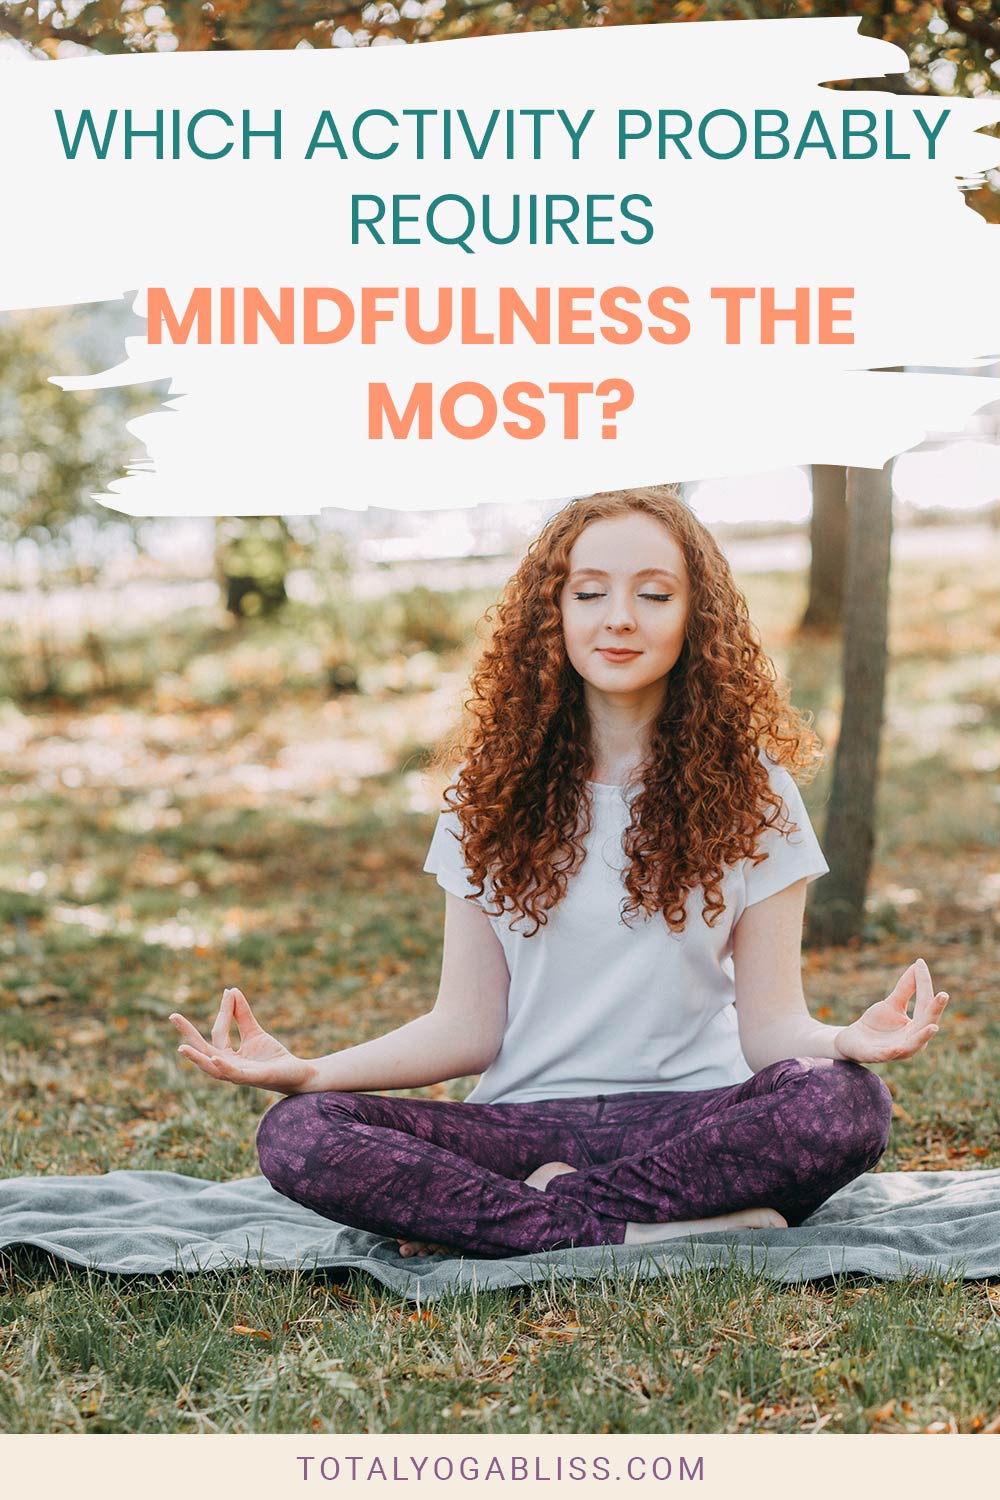 Woman with red hair doing yoga outside - Which Activity Probably Requires Mindfulness the Most?